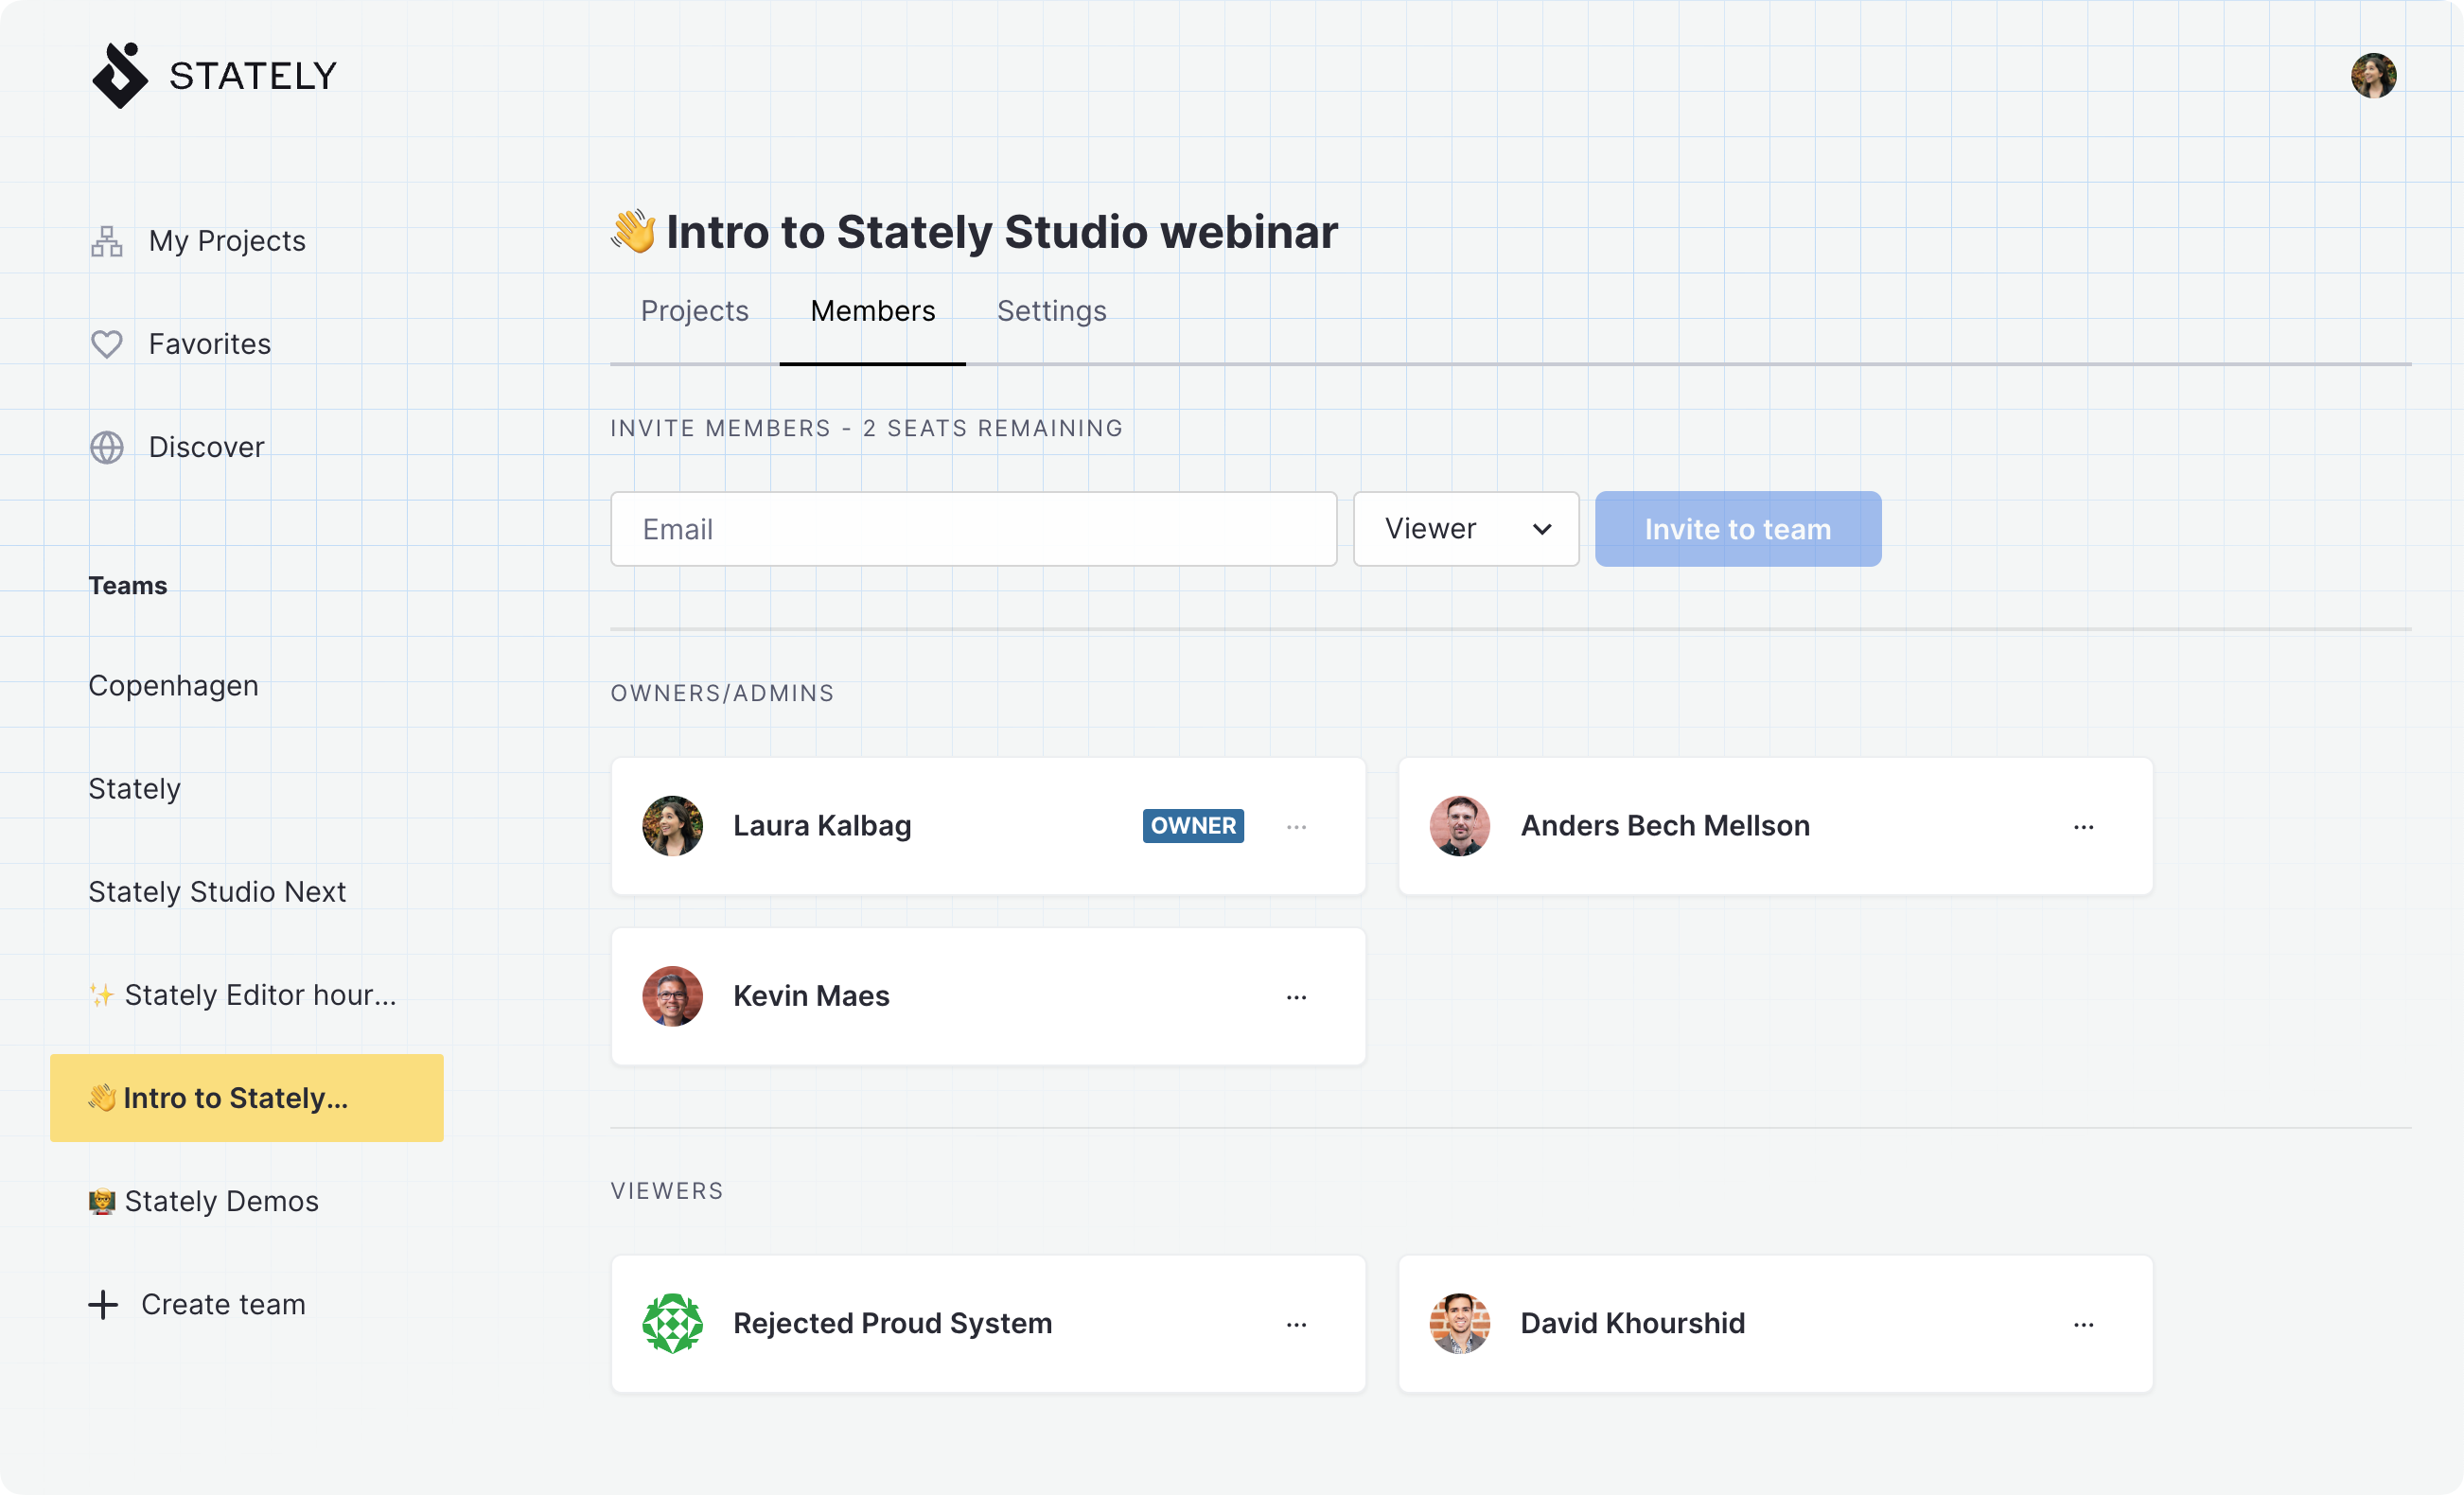 Stately Studio Team page for the Intro to Stately Studio webinar team, showing Laura Kalbag with the owner and Admin role, Anders Bech Mellson and Kevin Maes with Admin roles, and Rejected Proud System and David Khourshid with Viewer roles.